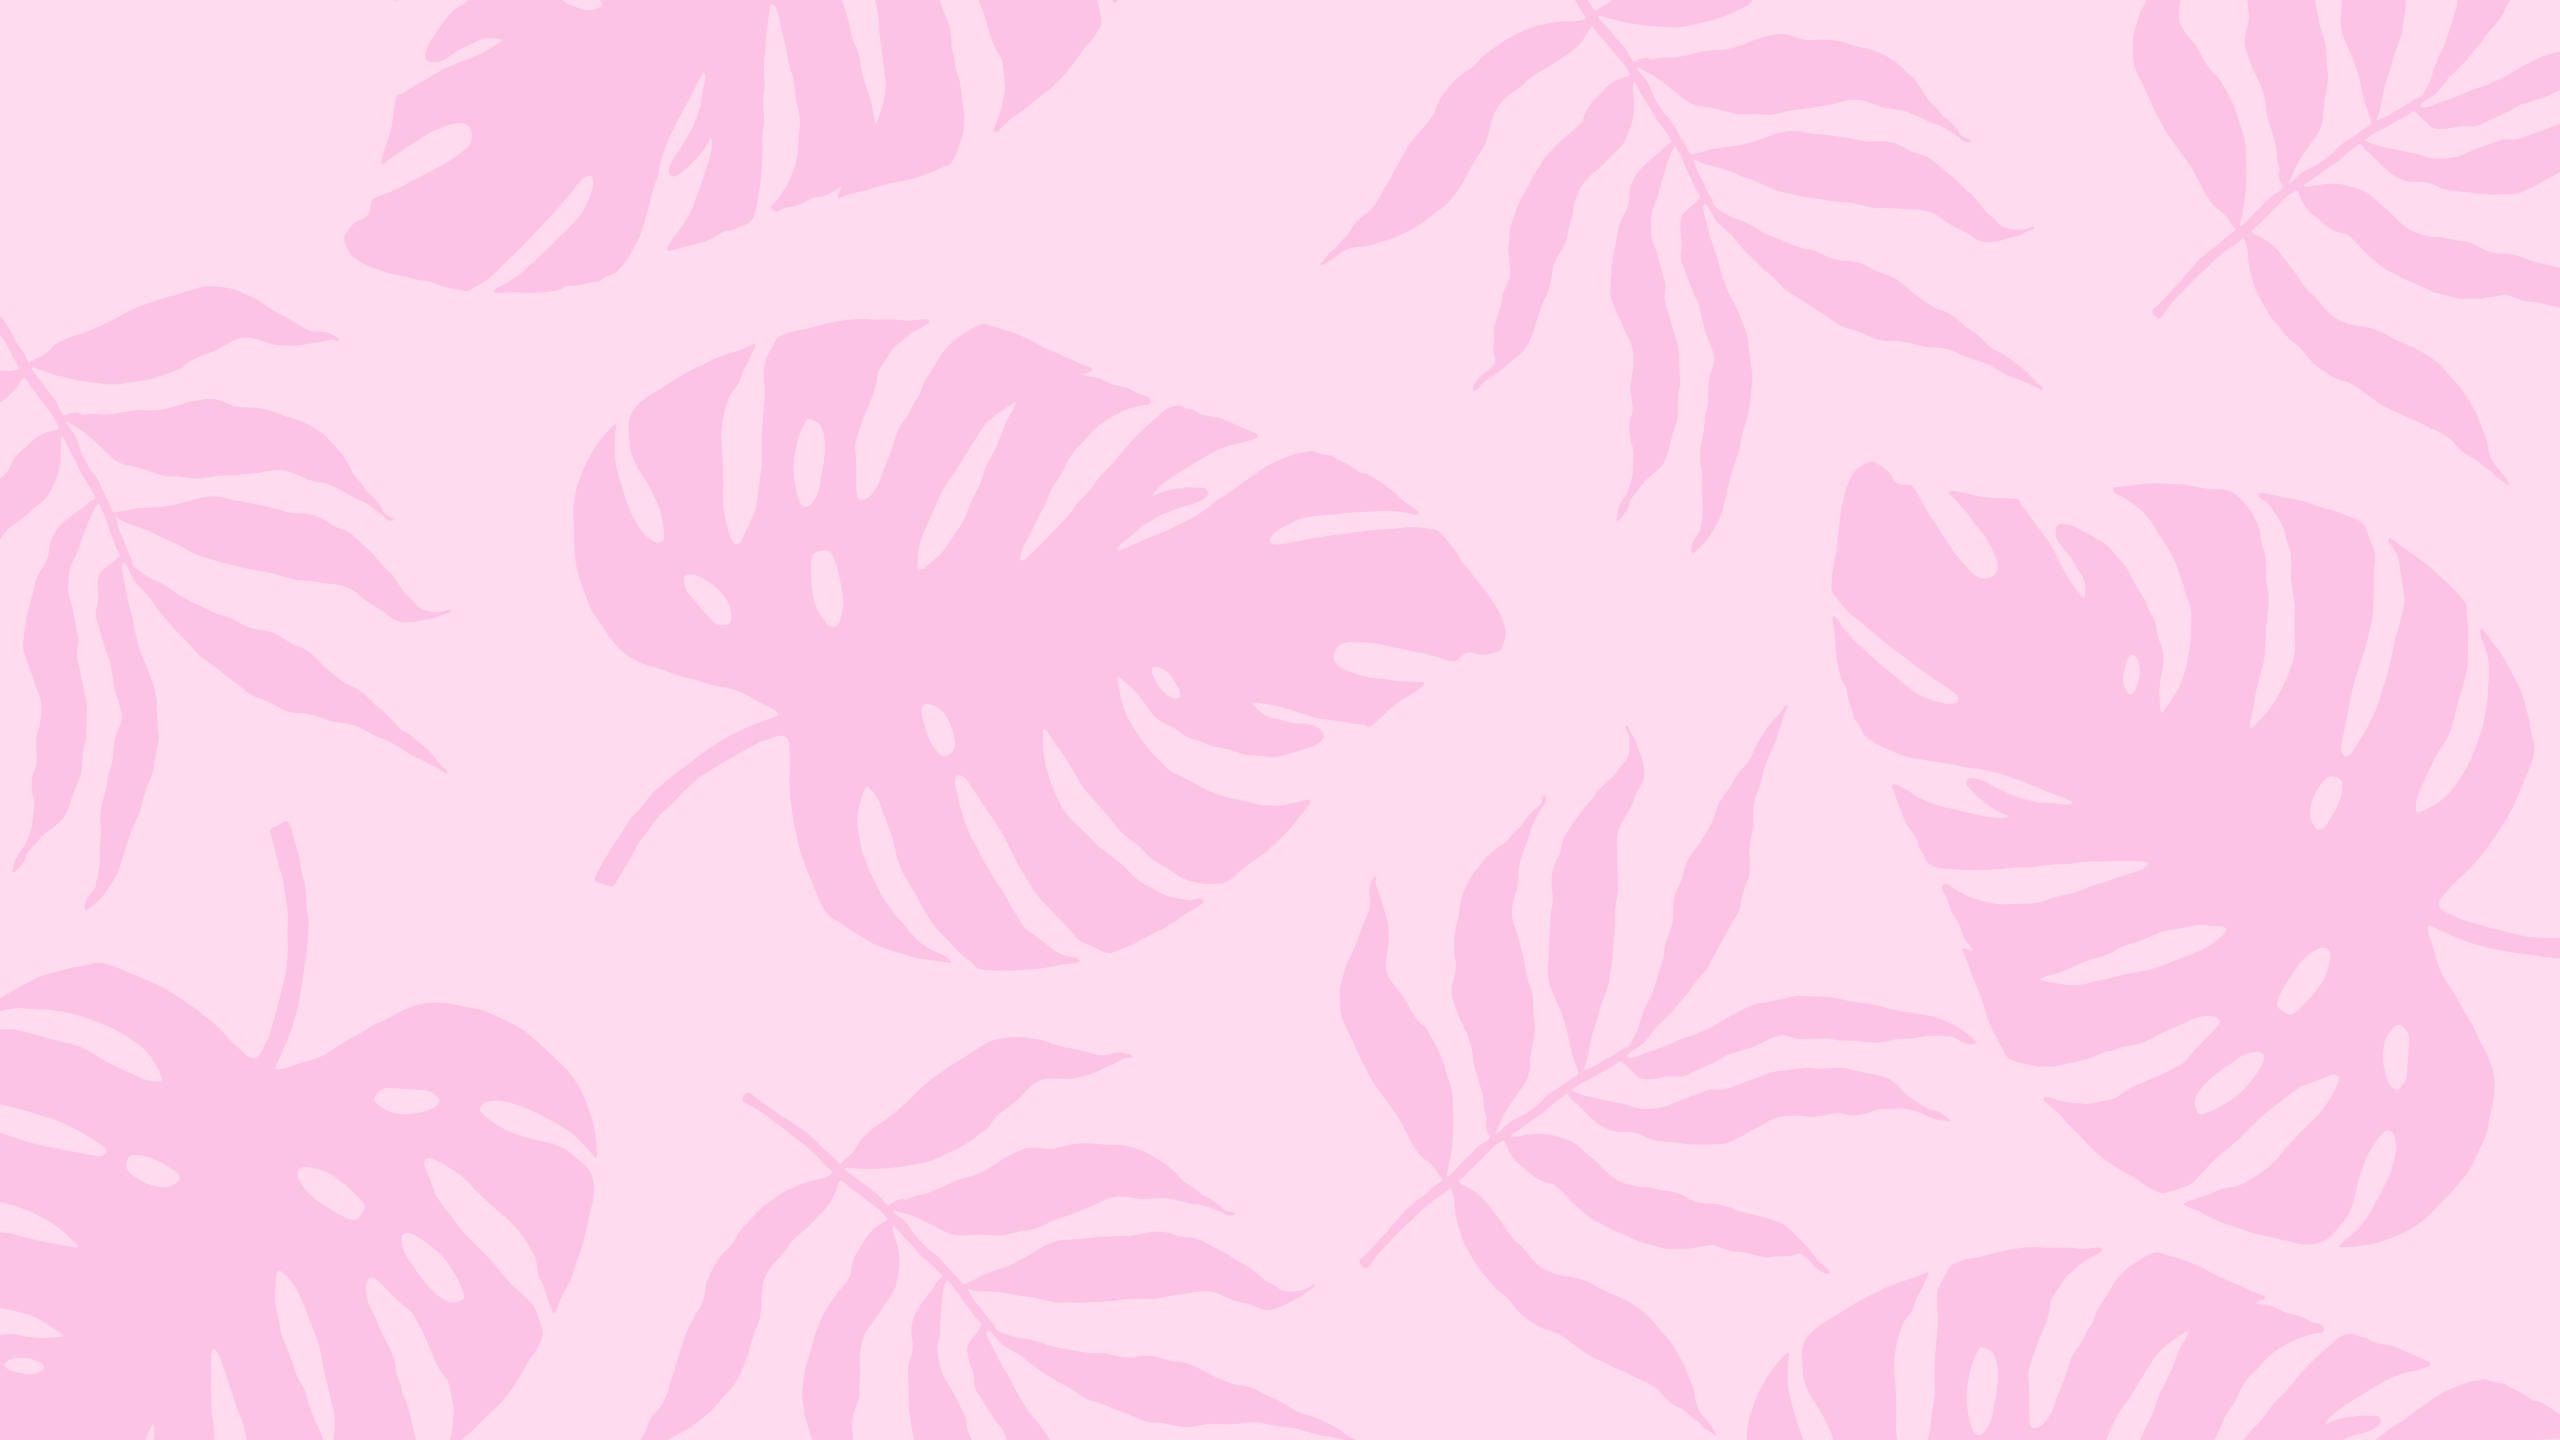 A pink and white pattern with palm leaves - 2560x1440